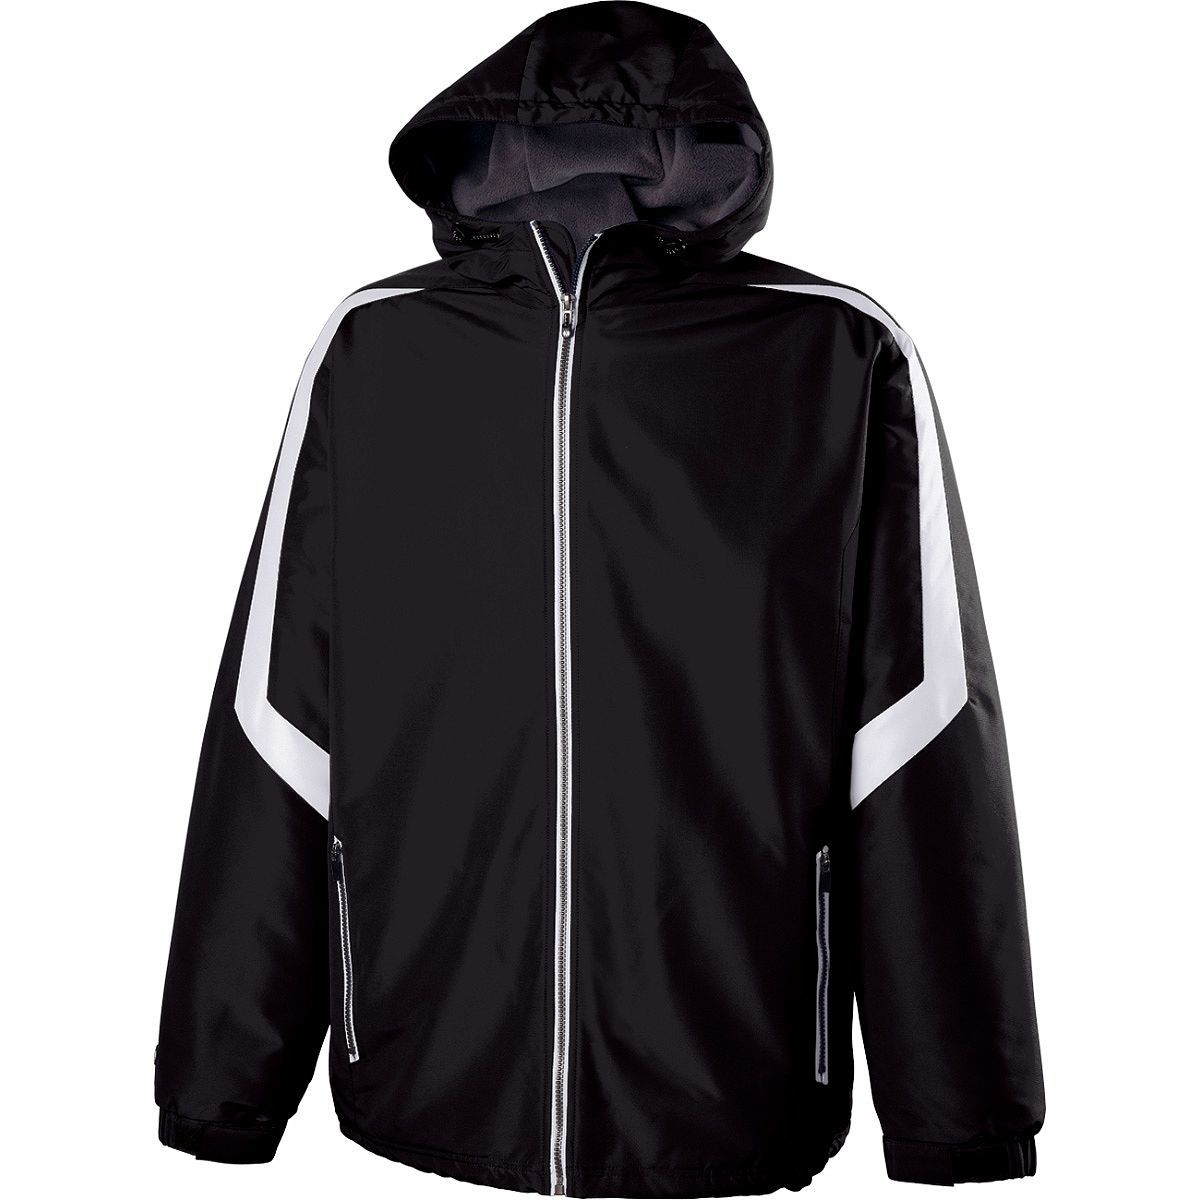 Holloway Sportswear L Charger Jacket Black/White 229059 - image 1 of 4